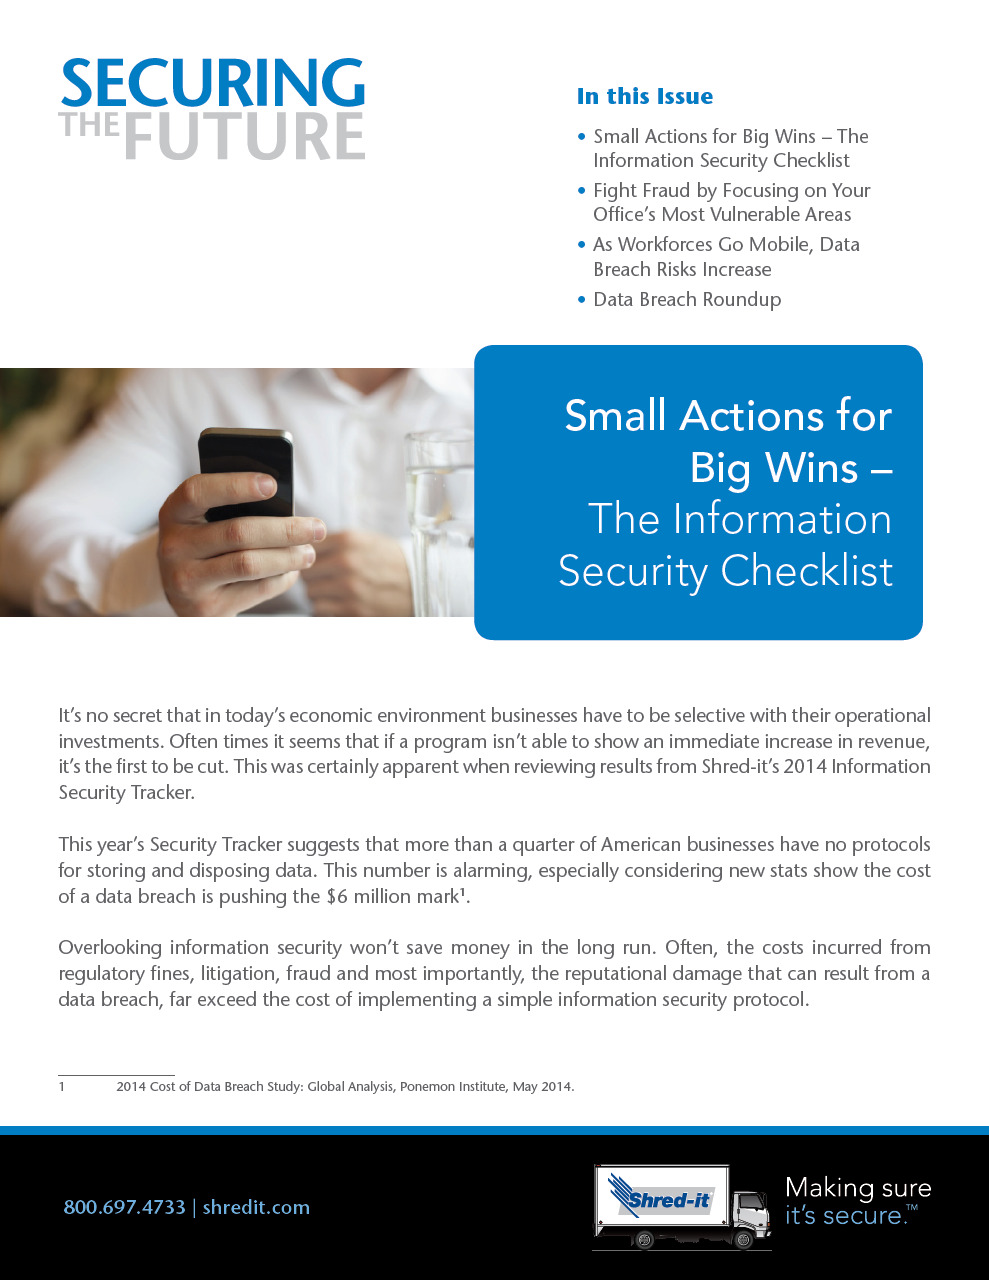 Shred-it_Small_Actions_for_Big_Wins_US_E.pdf